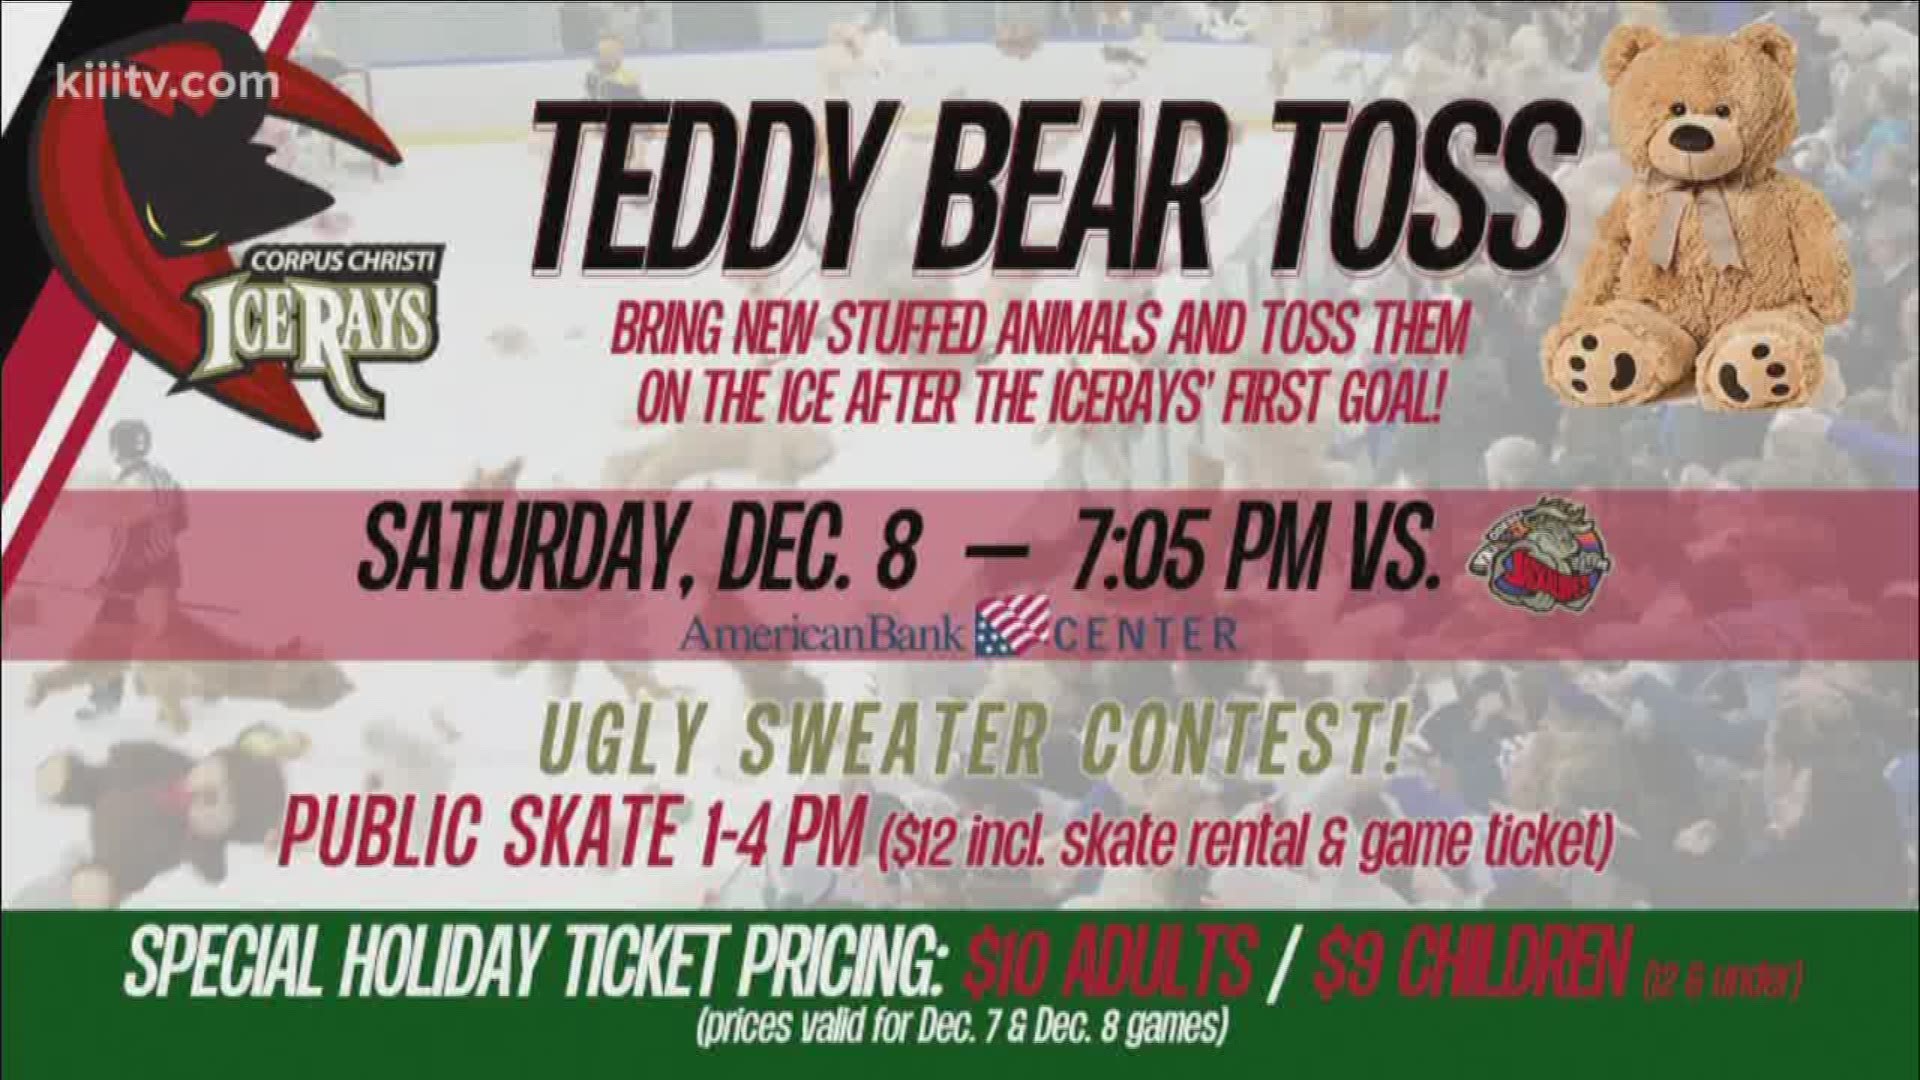 Friday and Saturday, December 7 & 8, 2018 tickets are only $10. Be sure to bring a teddy bear Saturday to donate as the gift will go to deserving kids this holiday season.